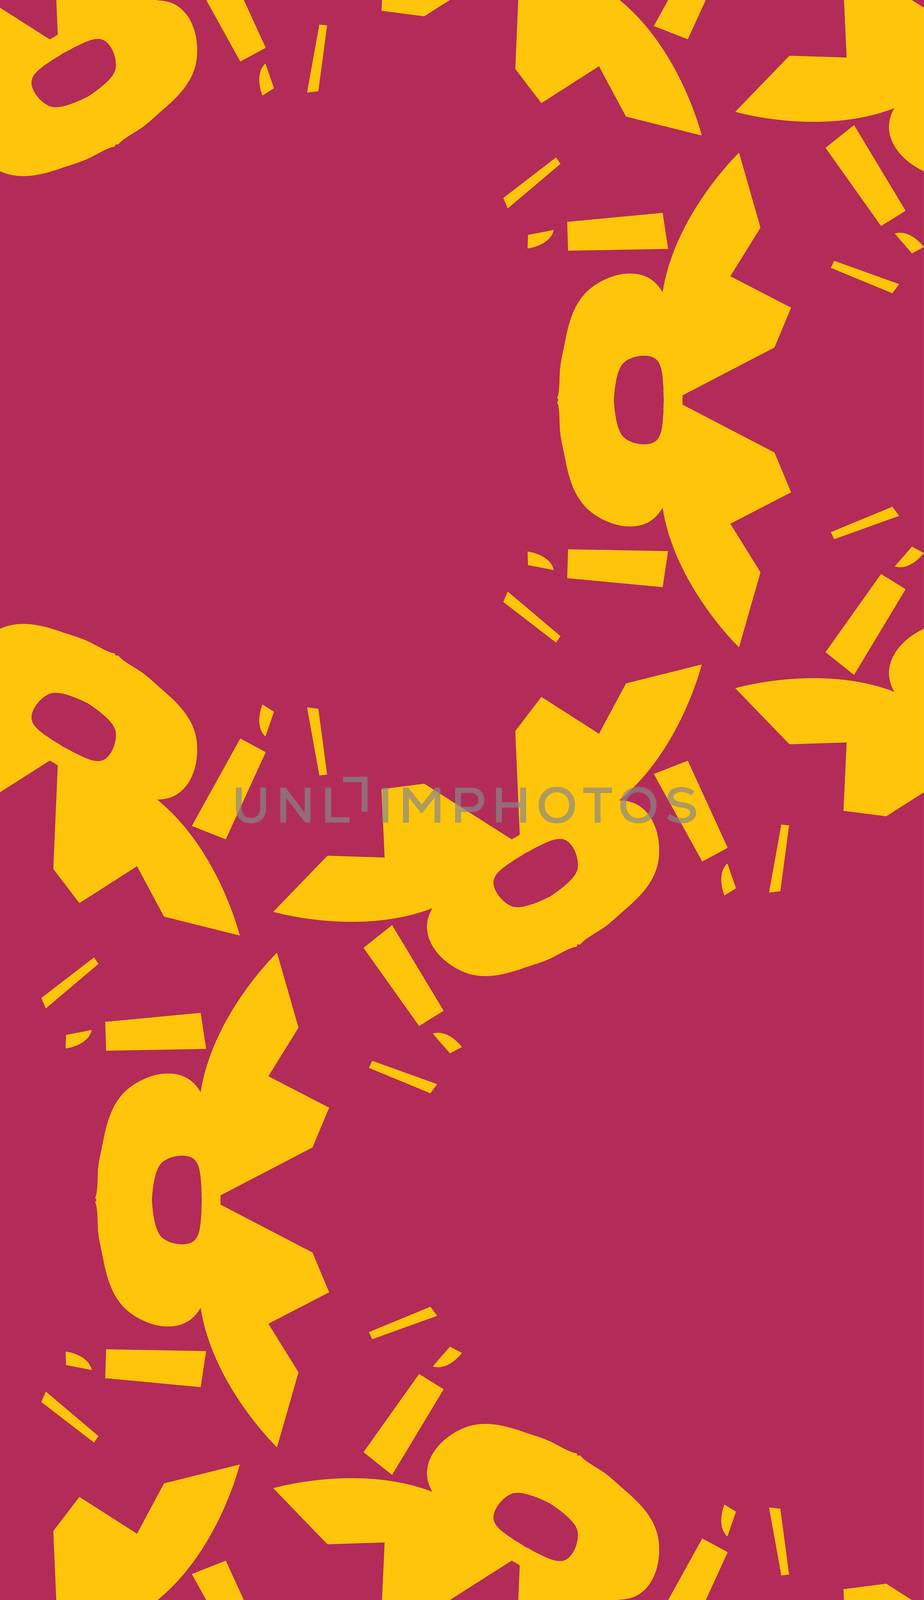 Abstract yellow shapes in repeating wallpaper pattern